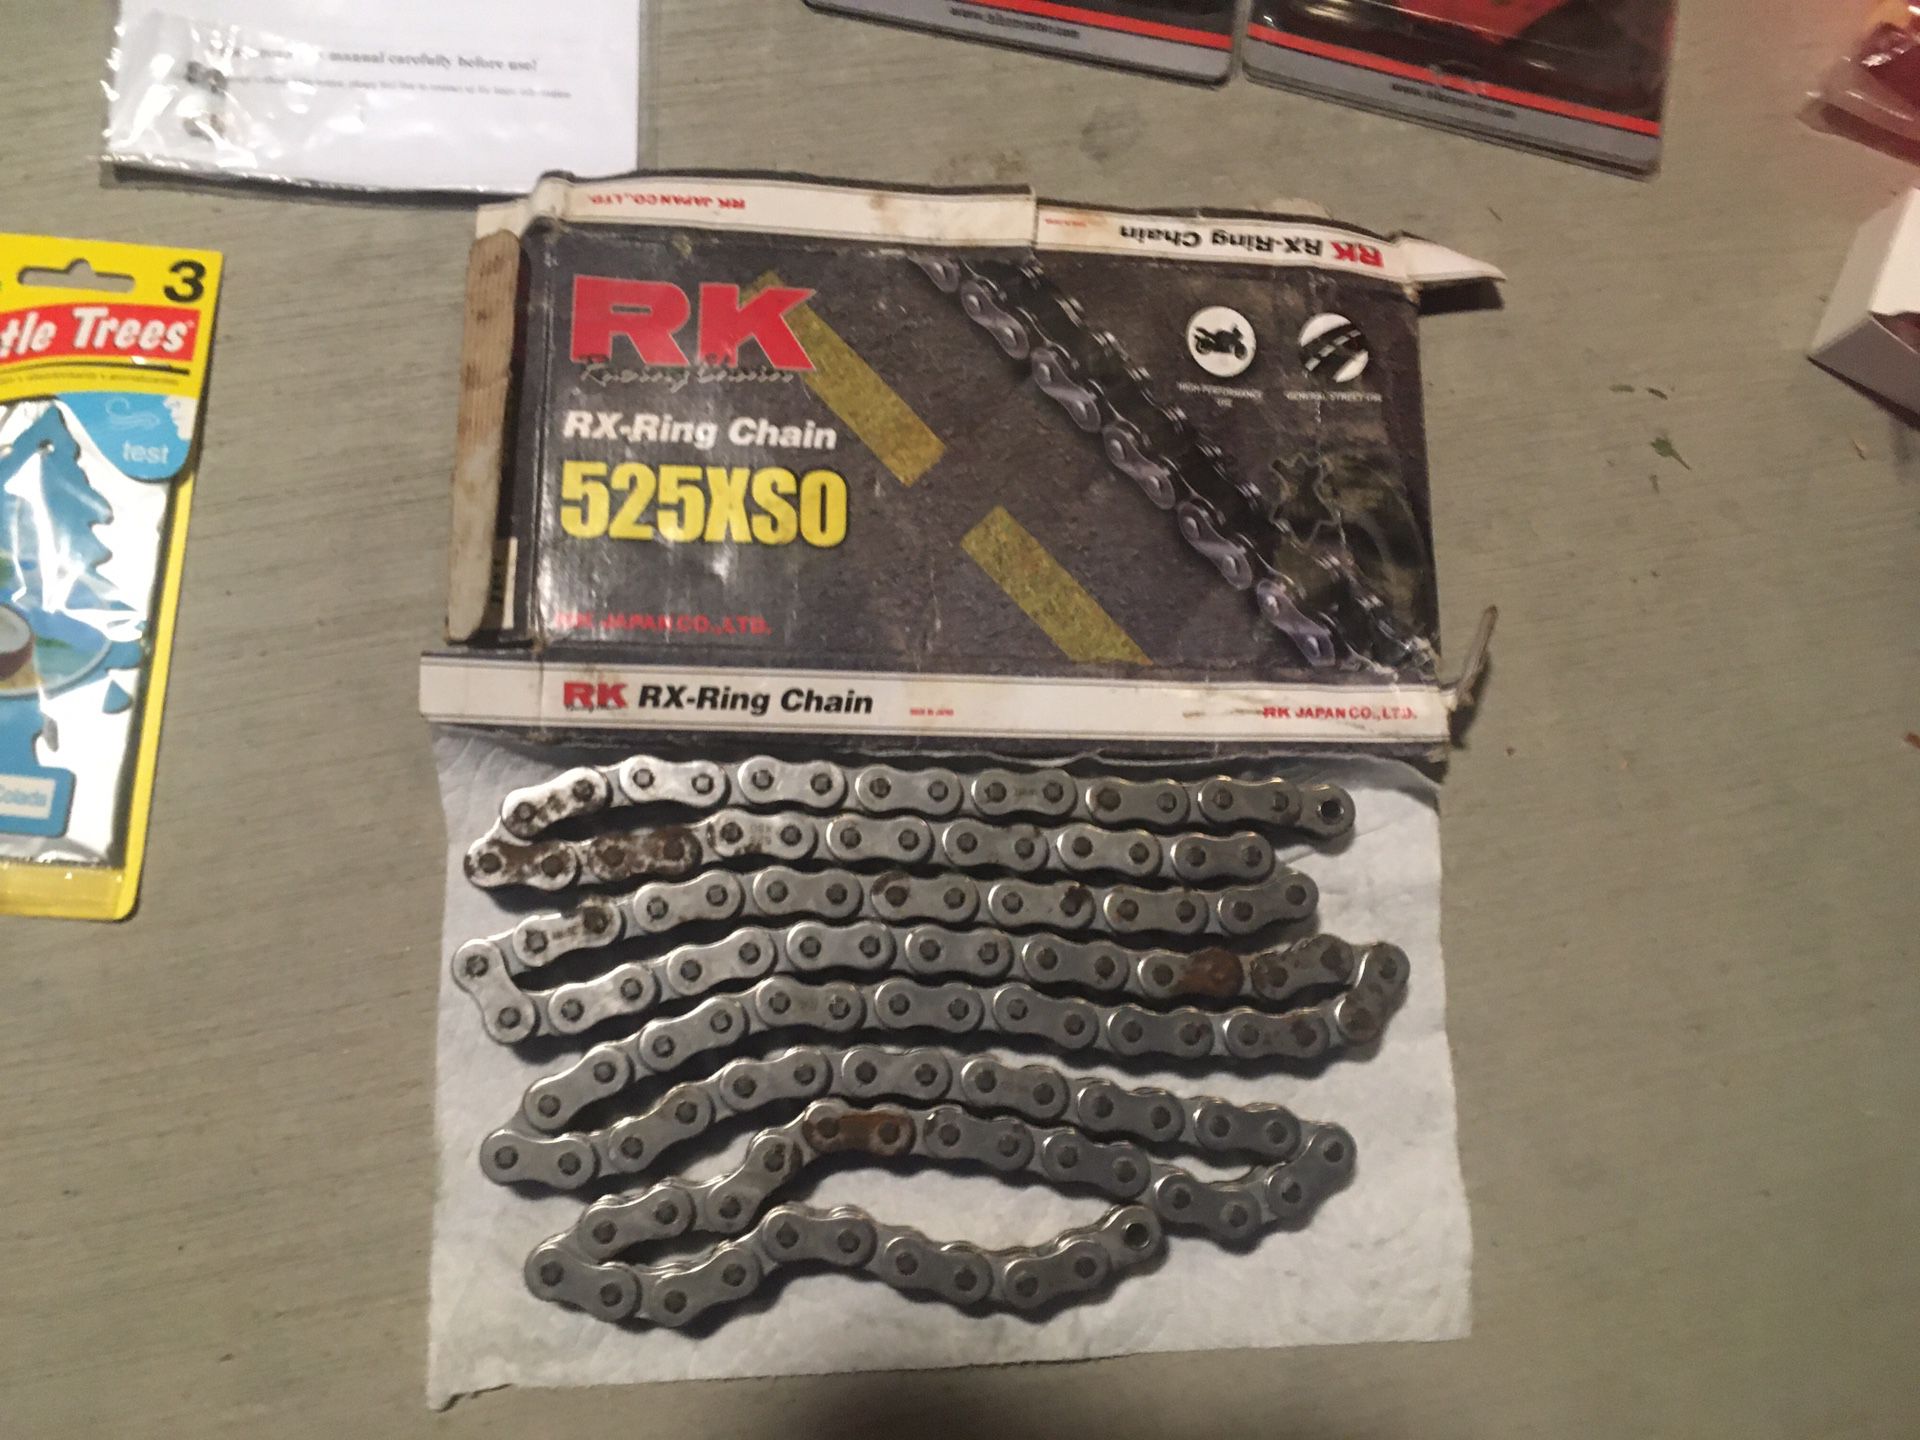 Motorcycle chain RK525xso xring (o ring) 70” Length